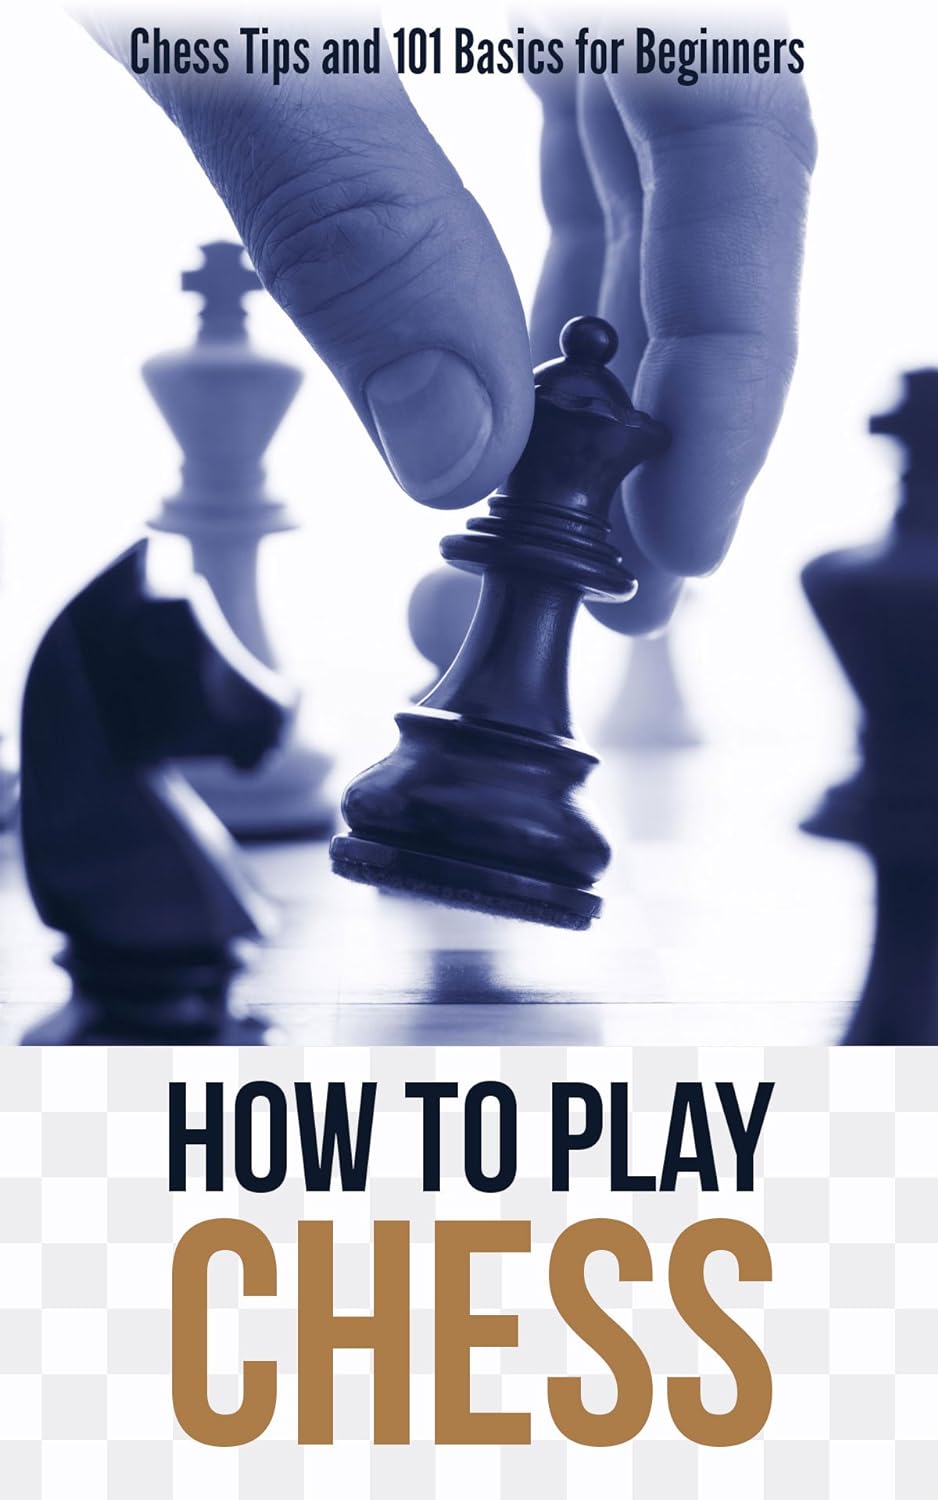 How to Play Chess: Chess Tips and 101 Basics for Beginners